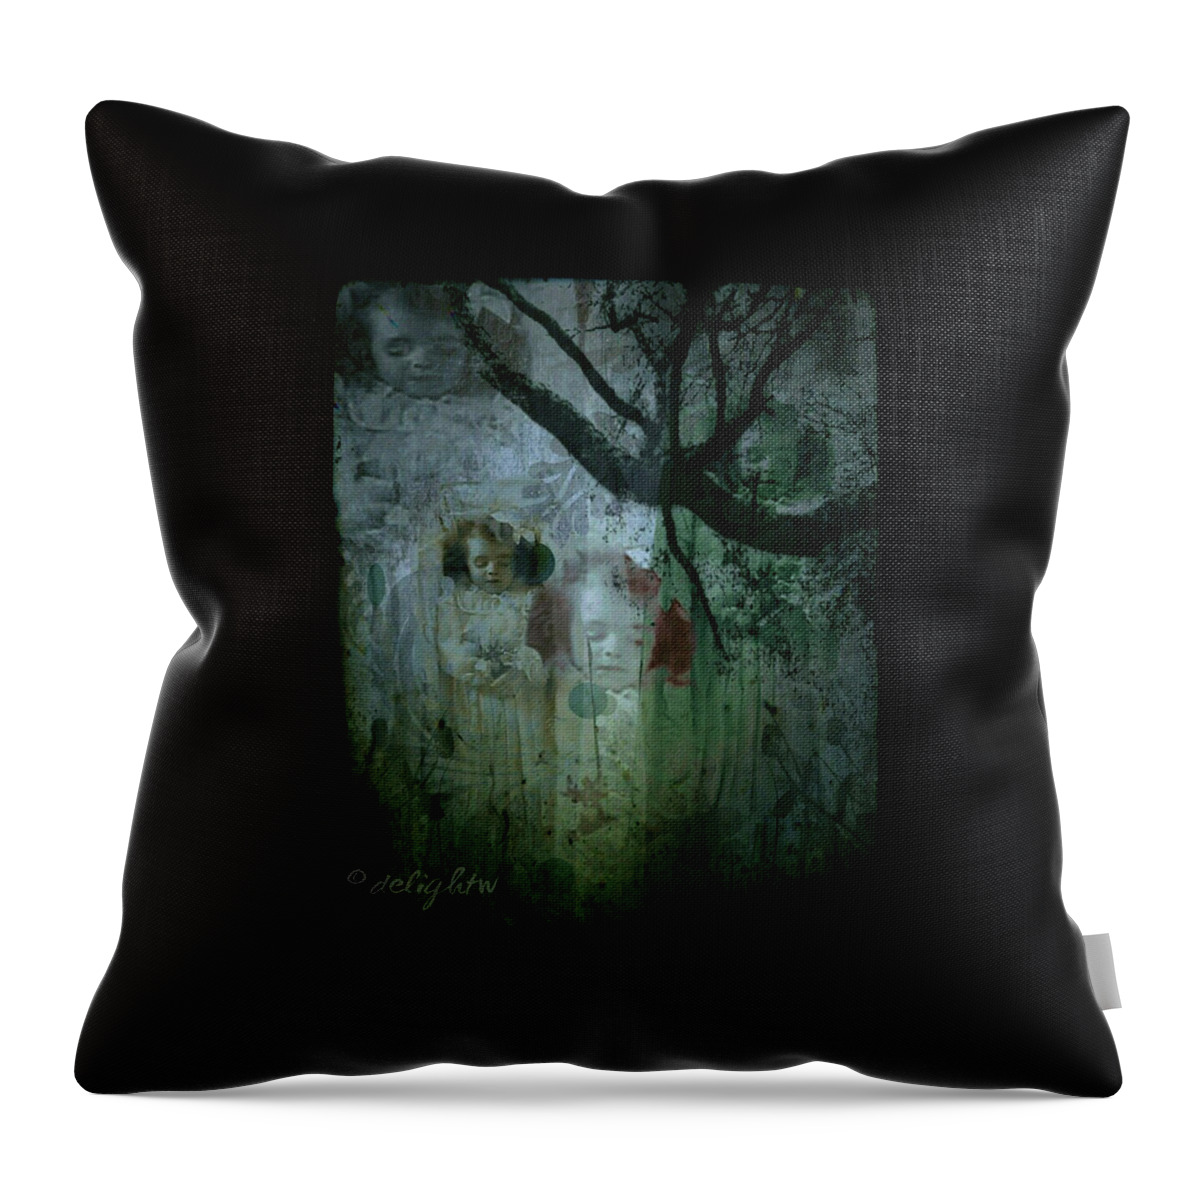 Vintage Throw Pillow featuring the digital art Haunting by Delight Worthyn